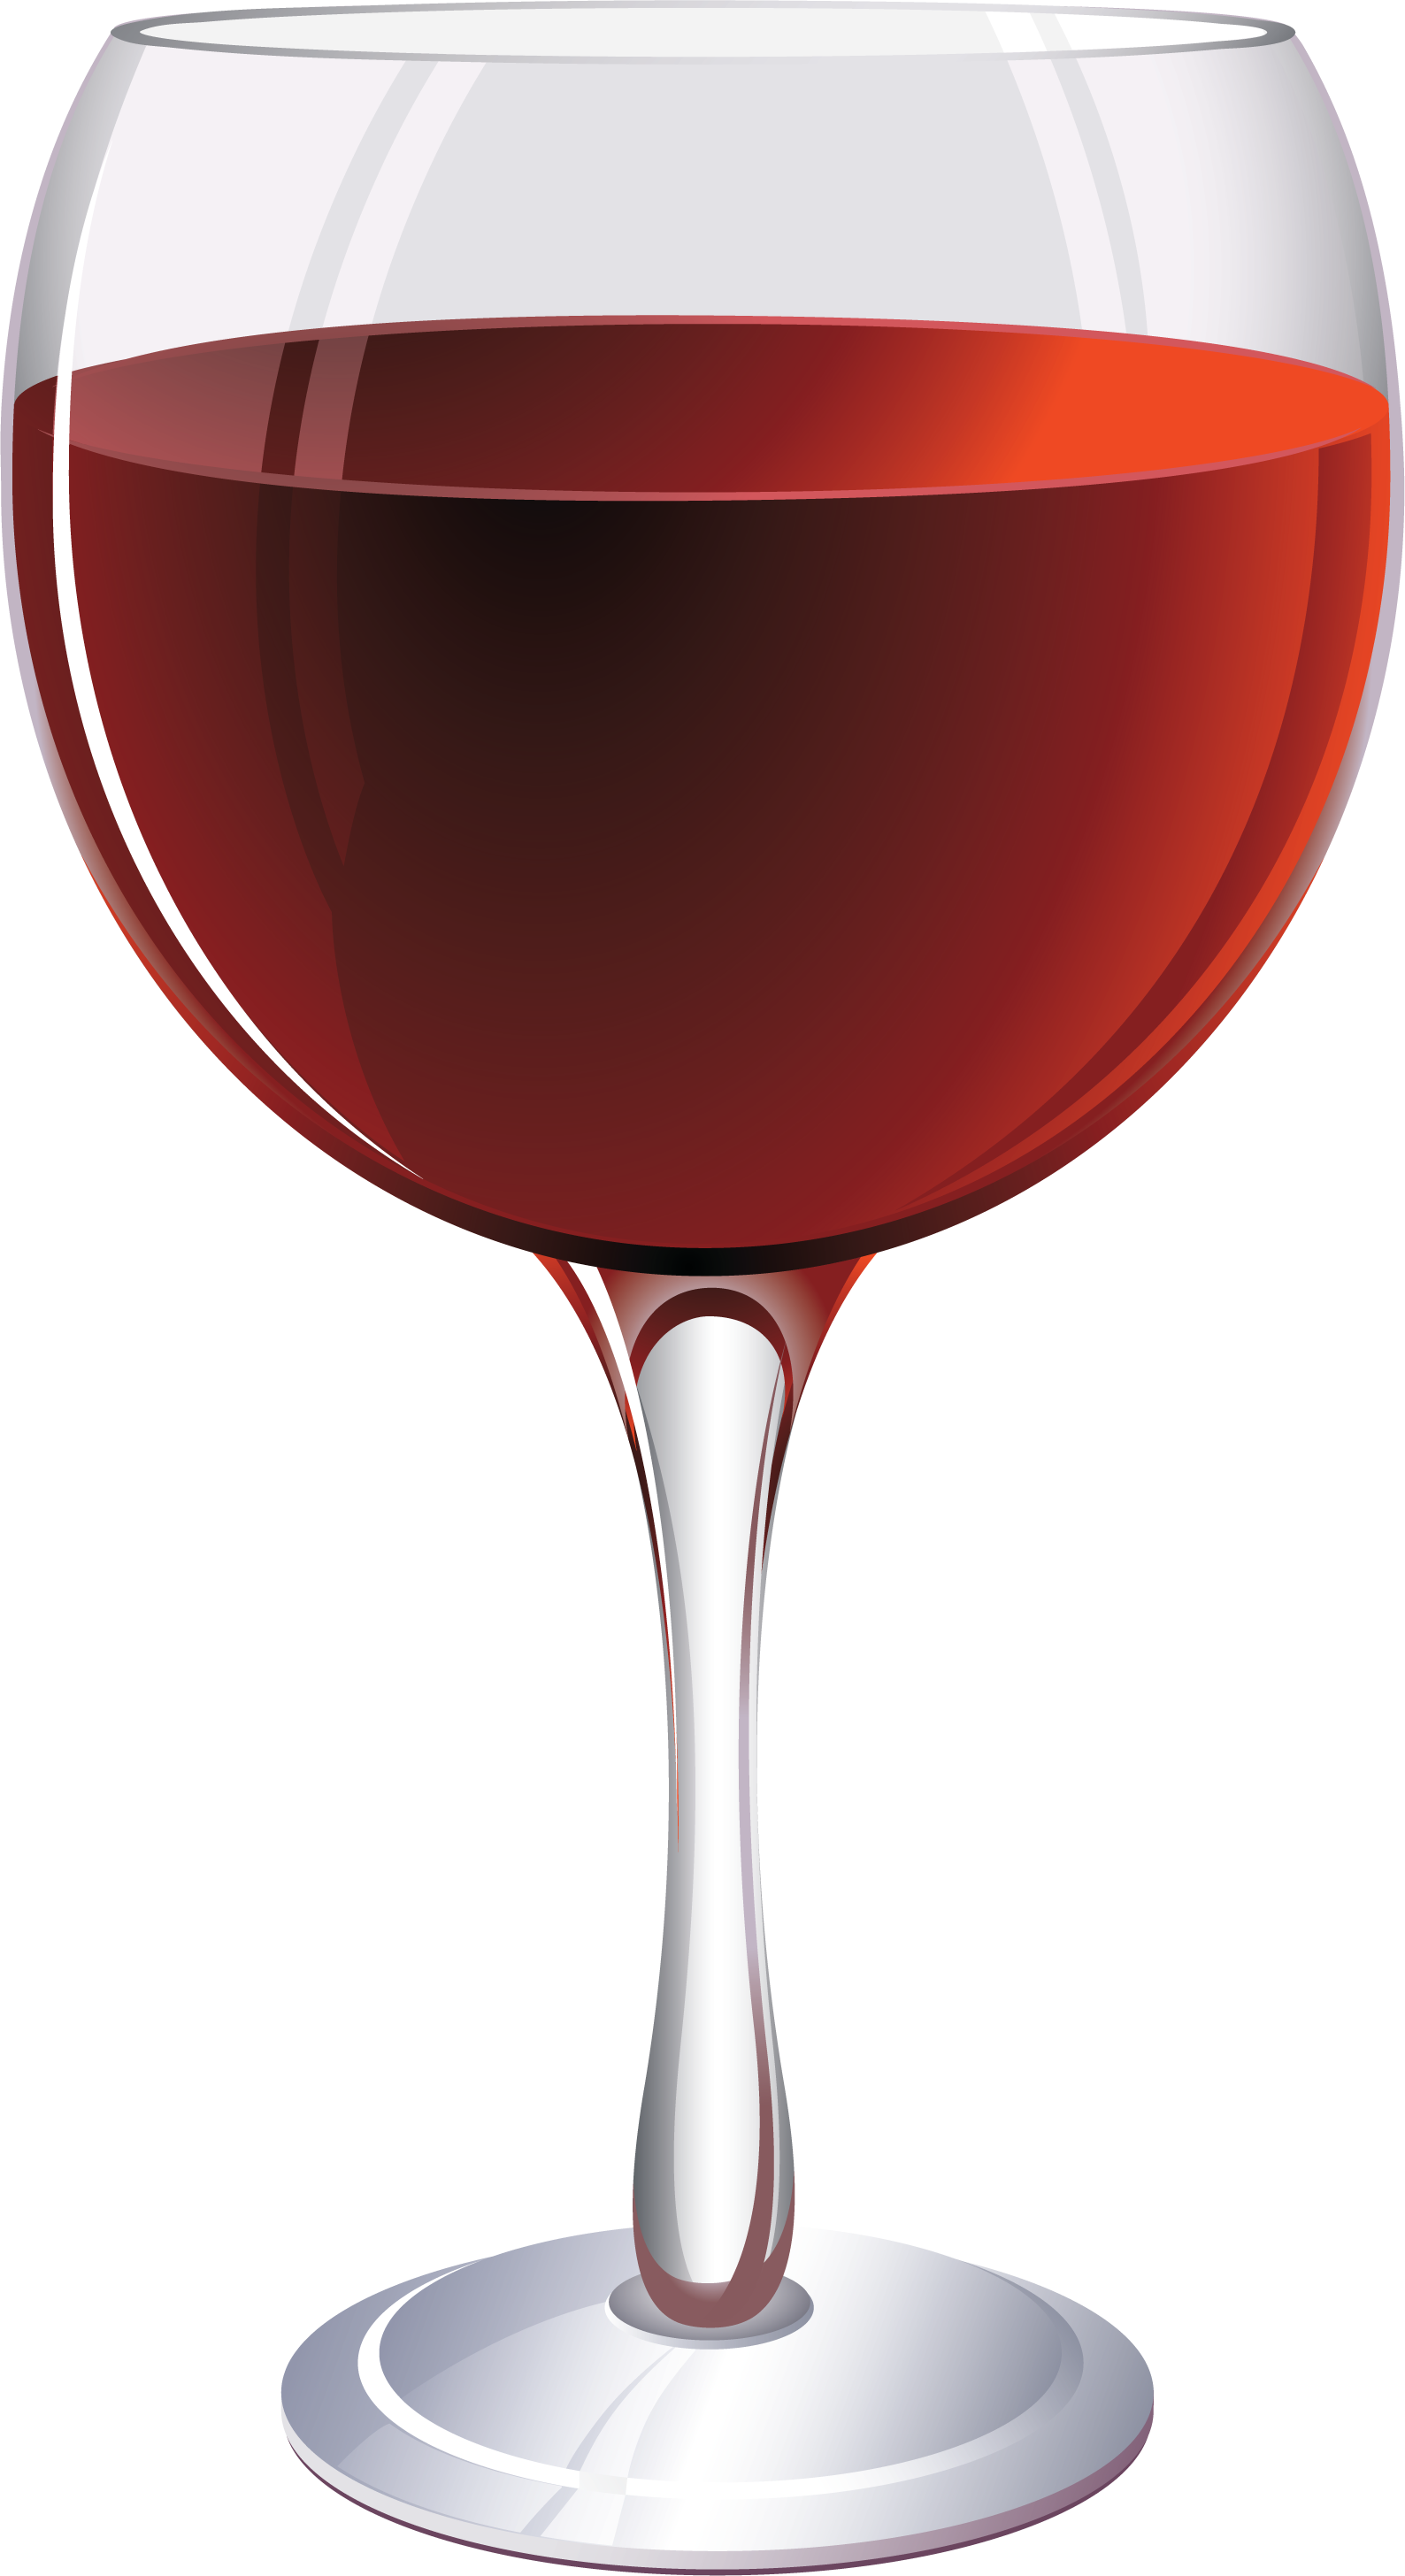 Wine Glass Go Red Wine Clipar - Wine Bottles And Glasses (1588x2912)